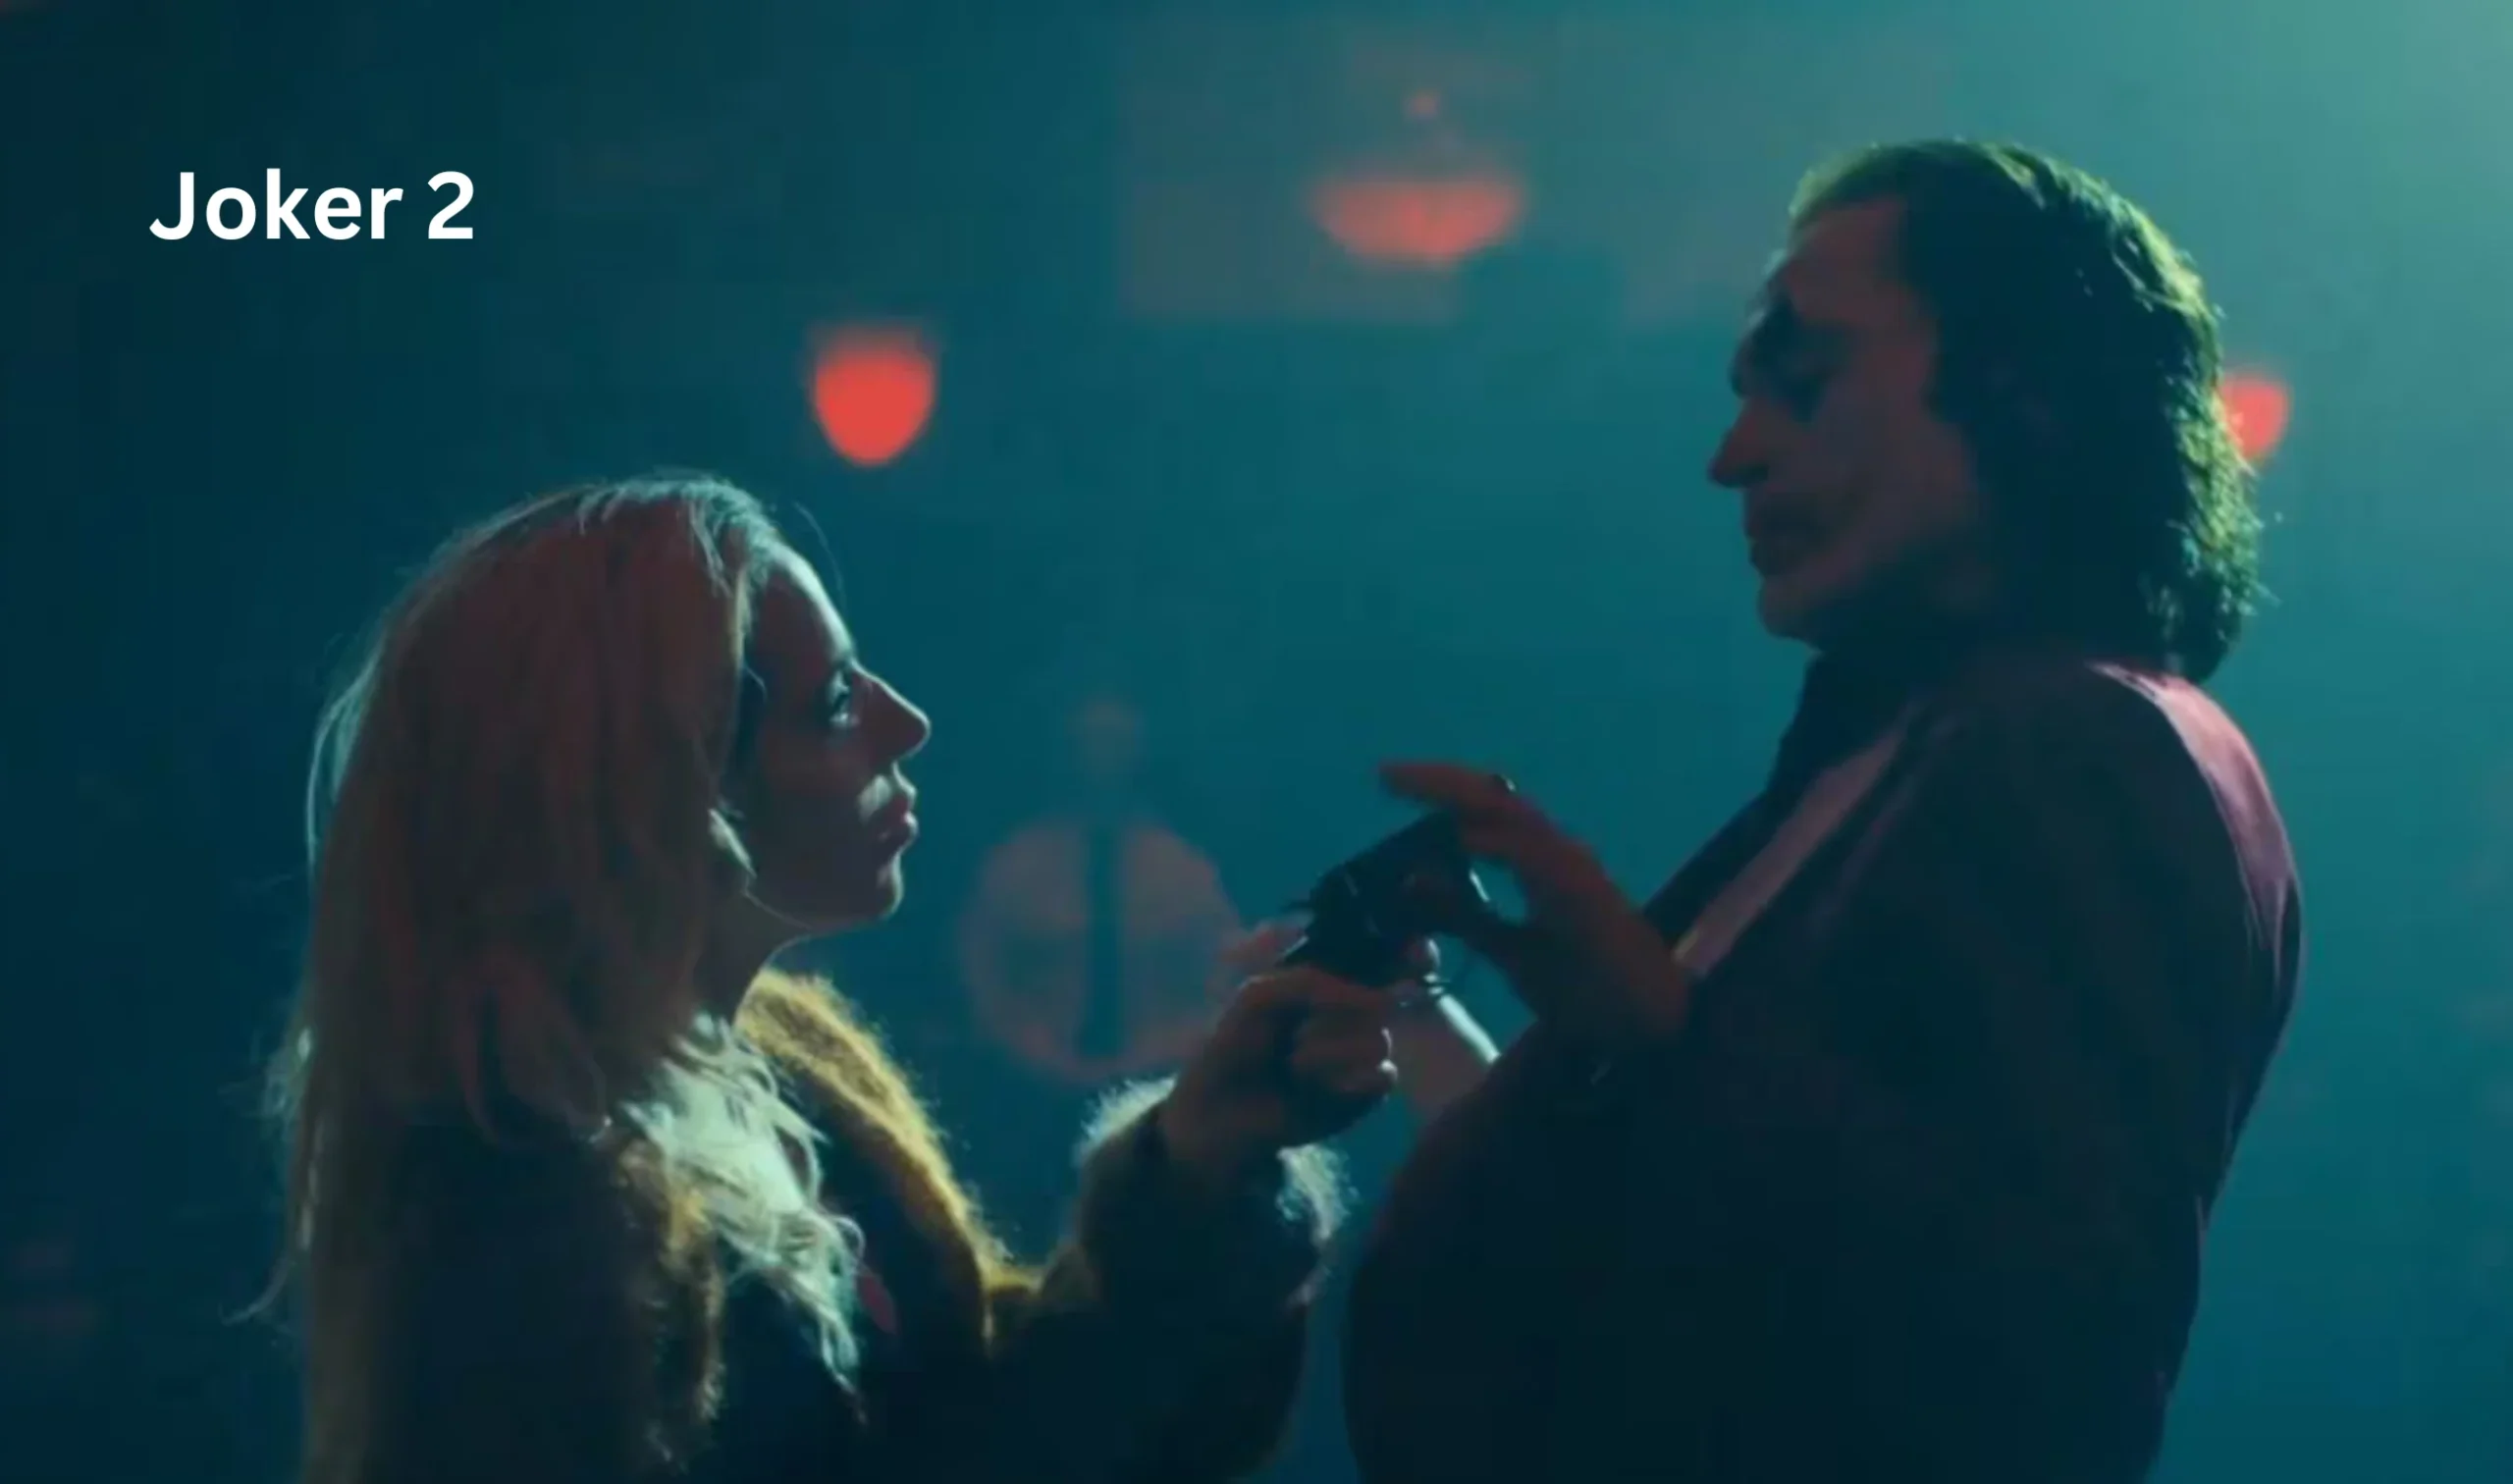 Joker 2 Trailer Review and Breakdown: Joaquin Phoenix and Lady Gaga Ready to Set the Screen on Fire